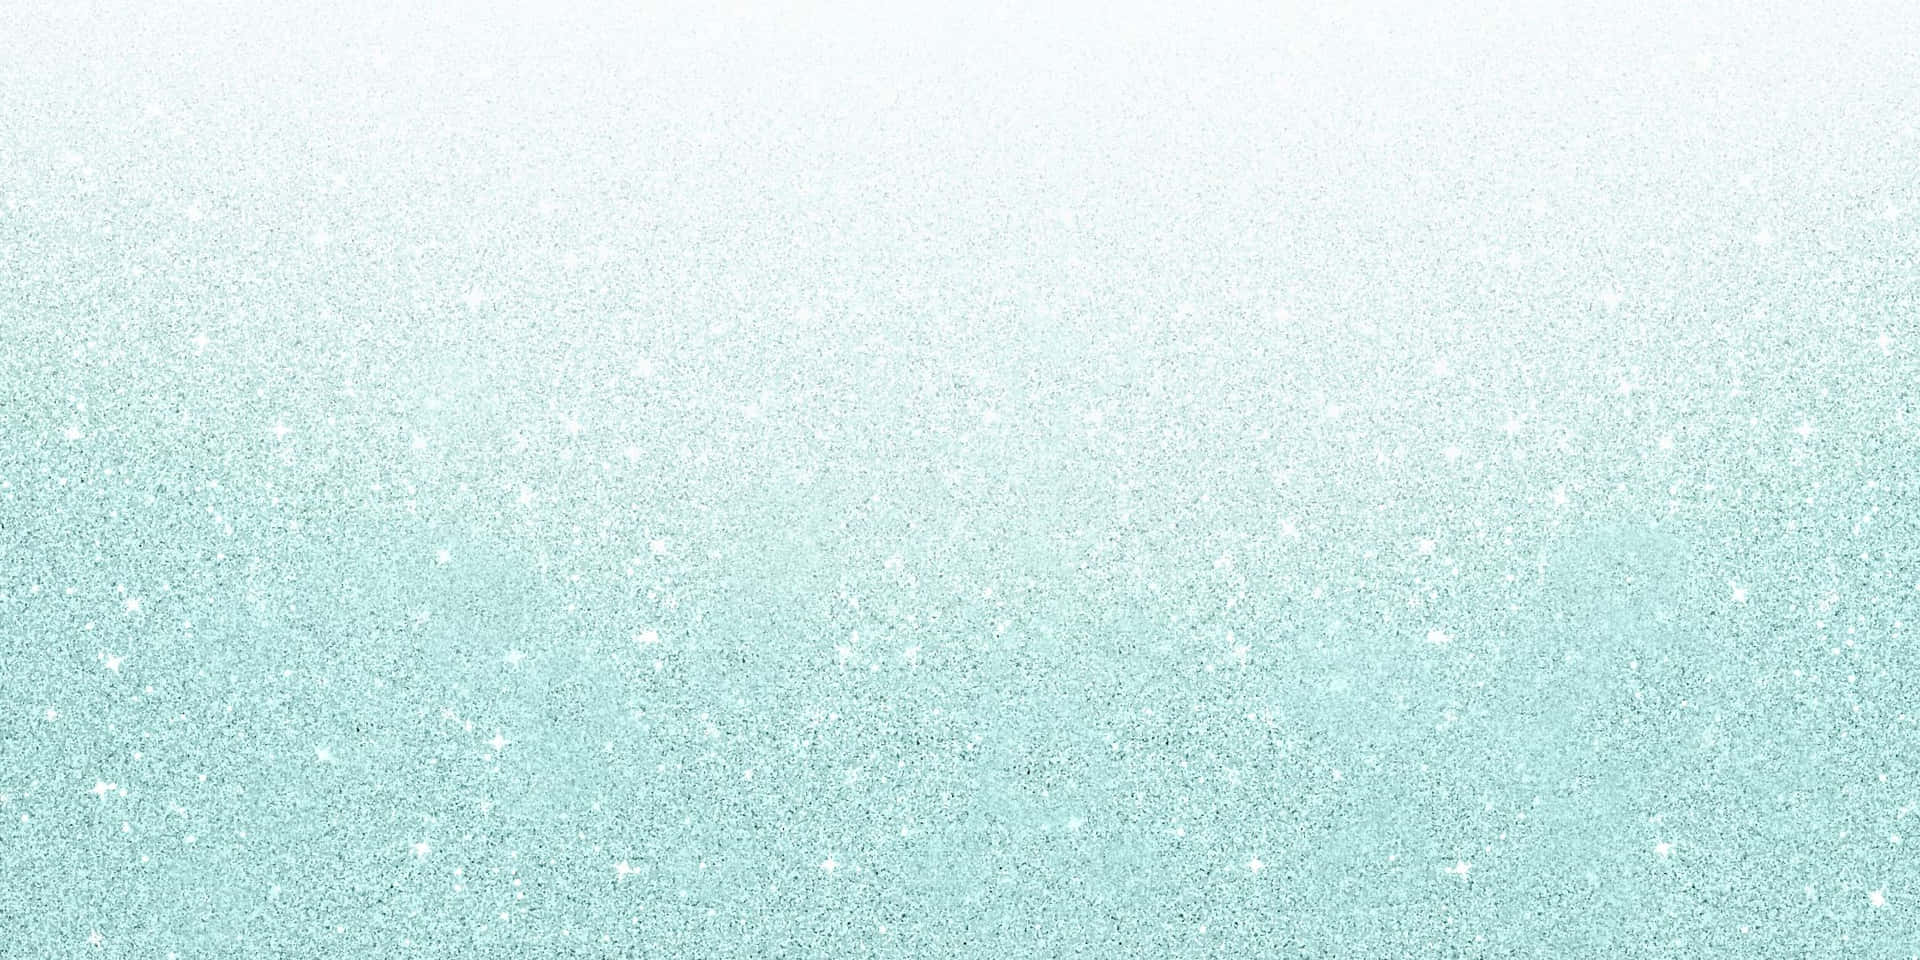 Spruce up your space with a beautiful Teal Glitter background